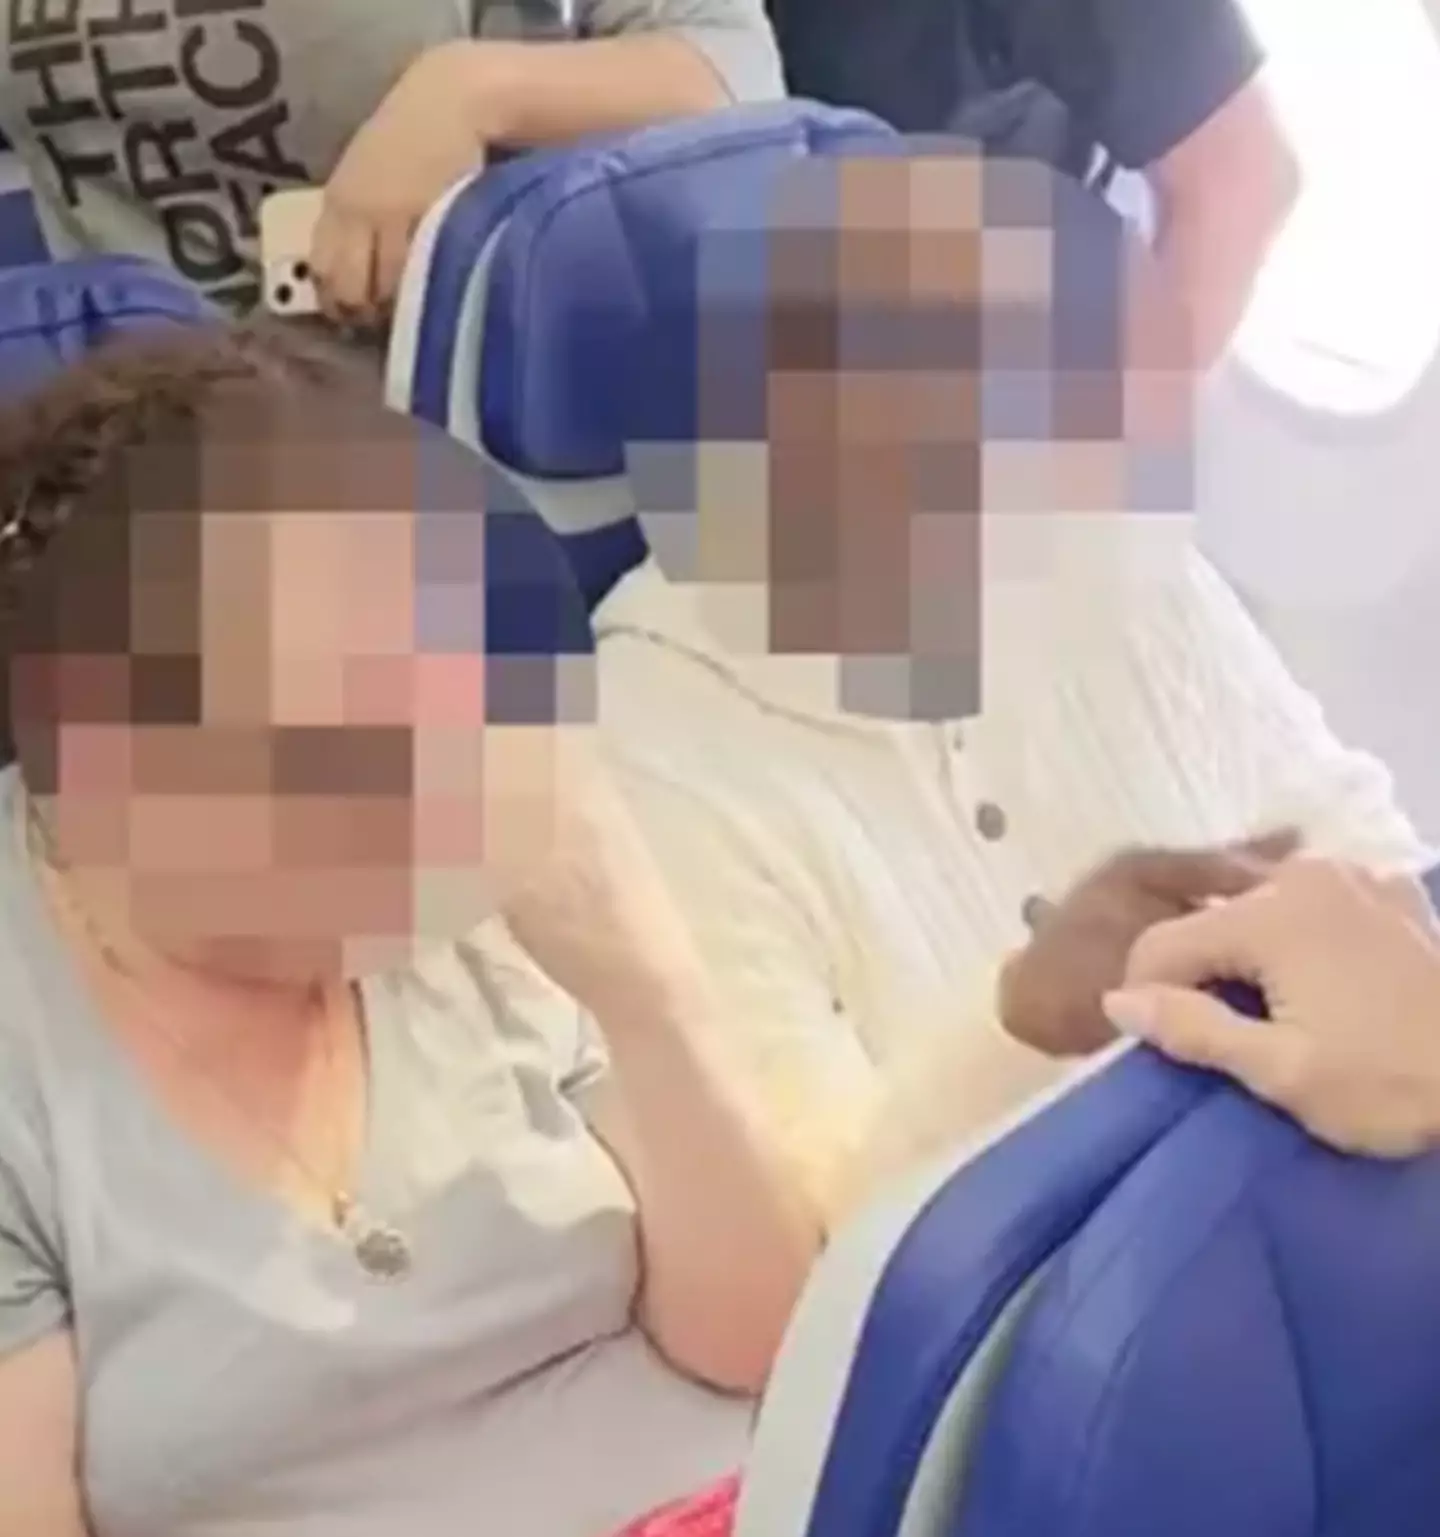 One man has launched a furious rant at parents during a flight after their baby was relentlessly 'crying for 45 minutes'.